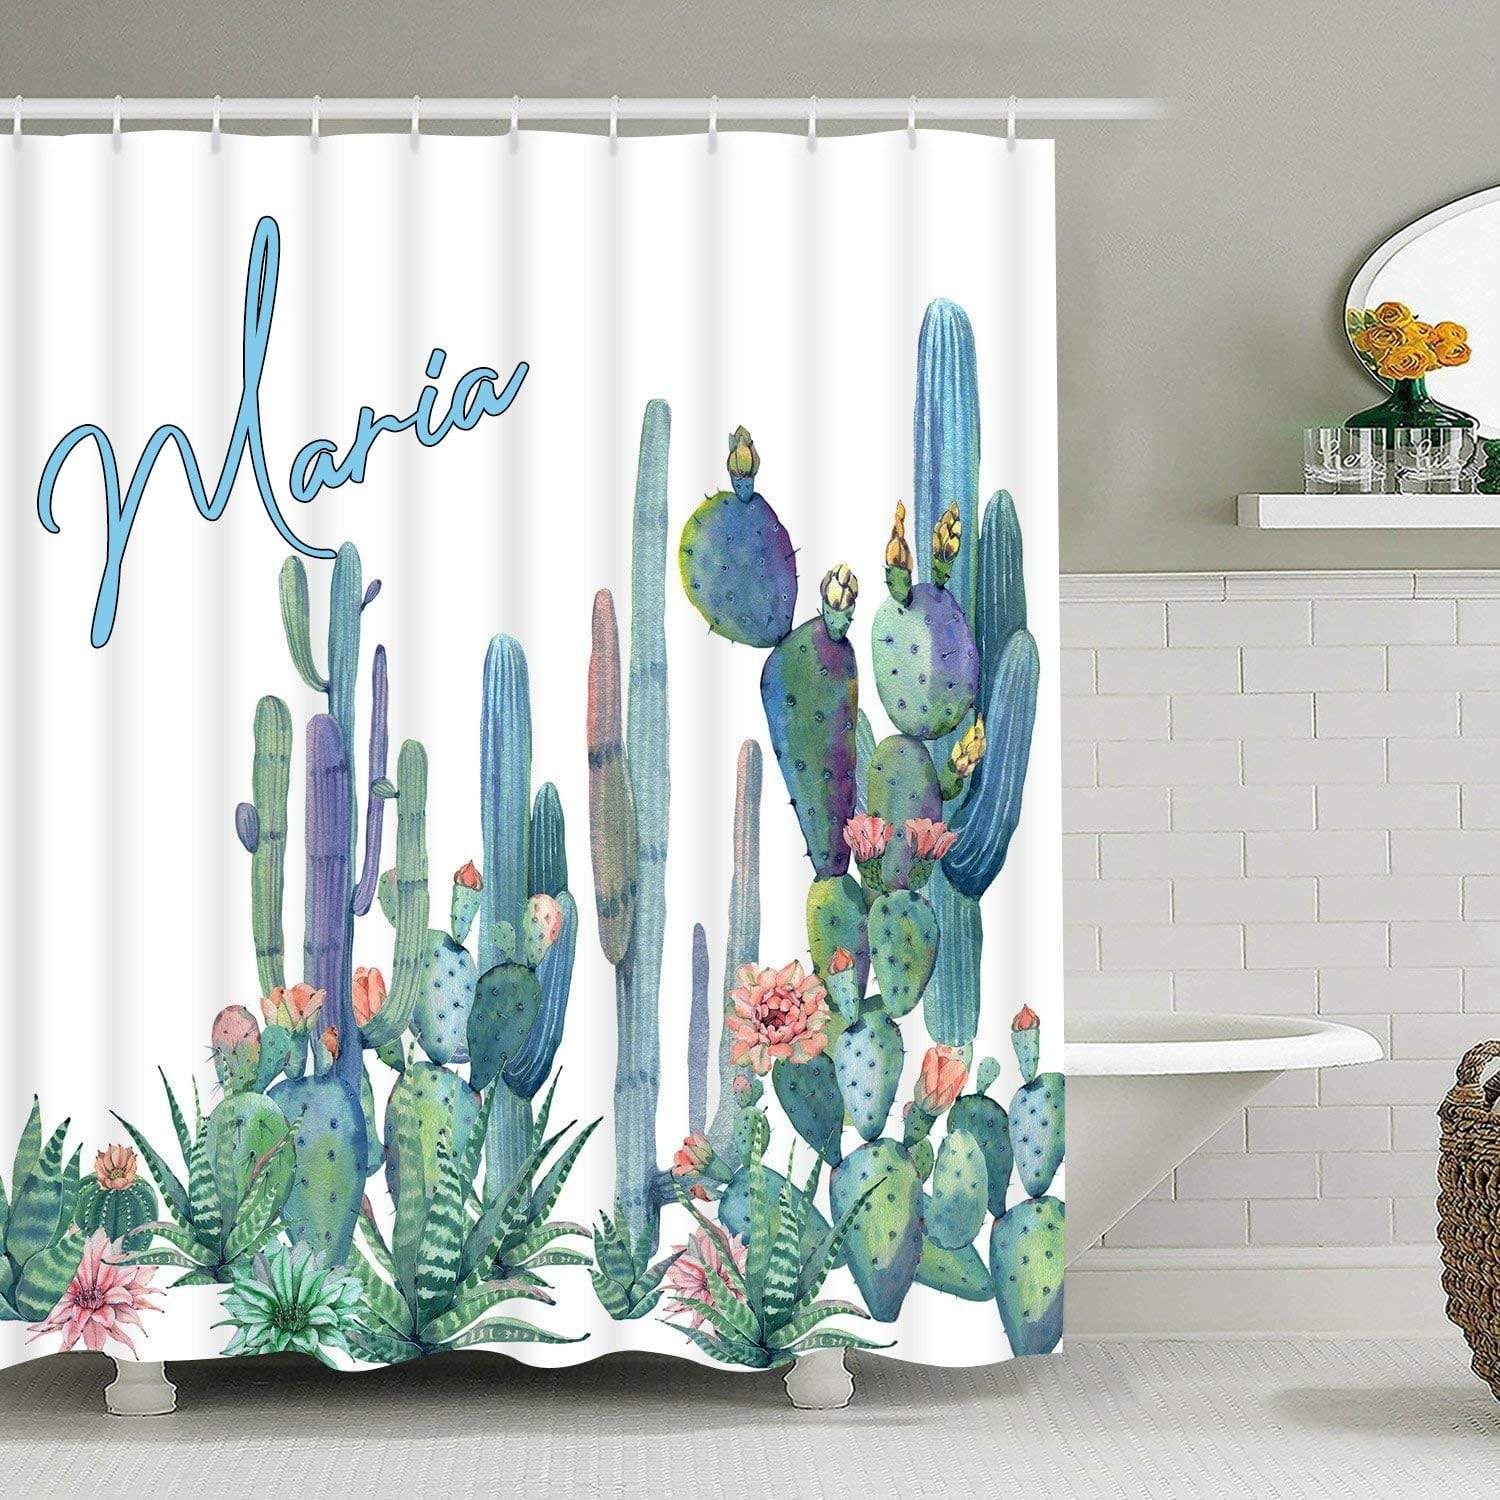 Personalized Cactus Shower Curtain Custom Name